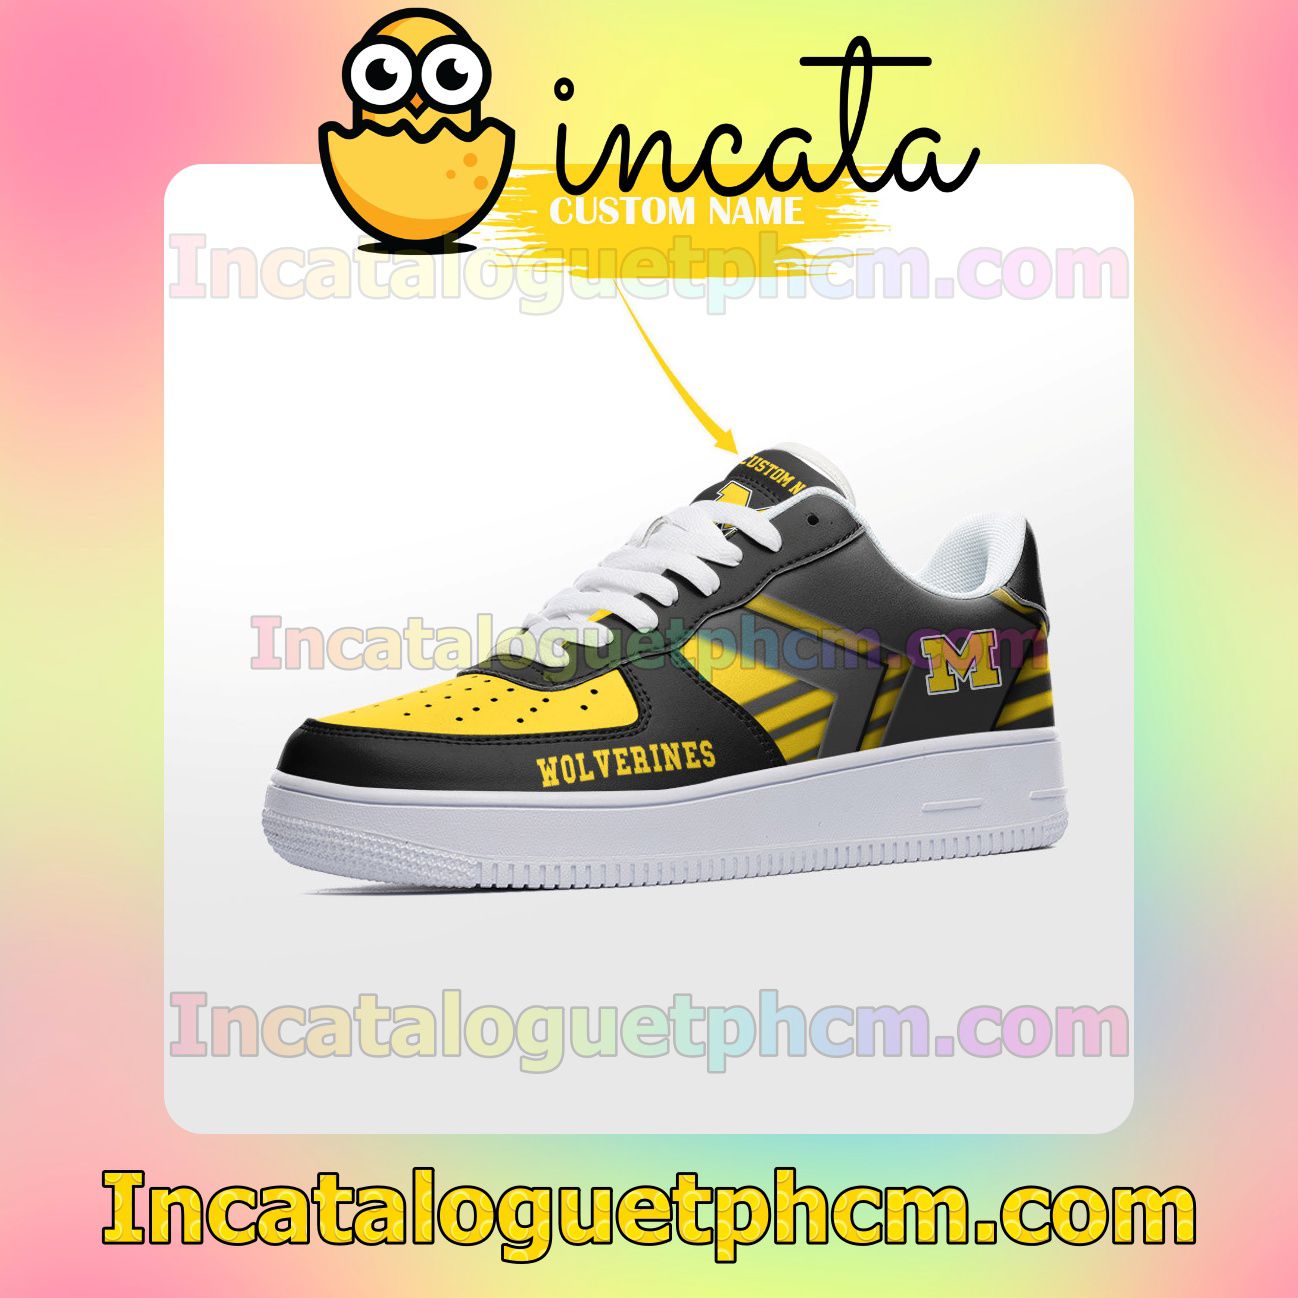 Around Me Personalized NCAA Michigan Wolverines Custom Name Nike Low Shoes Sneakers